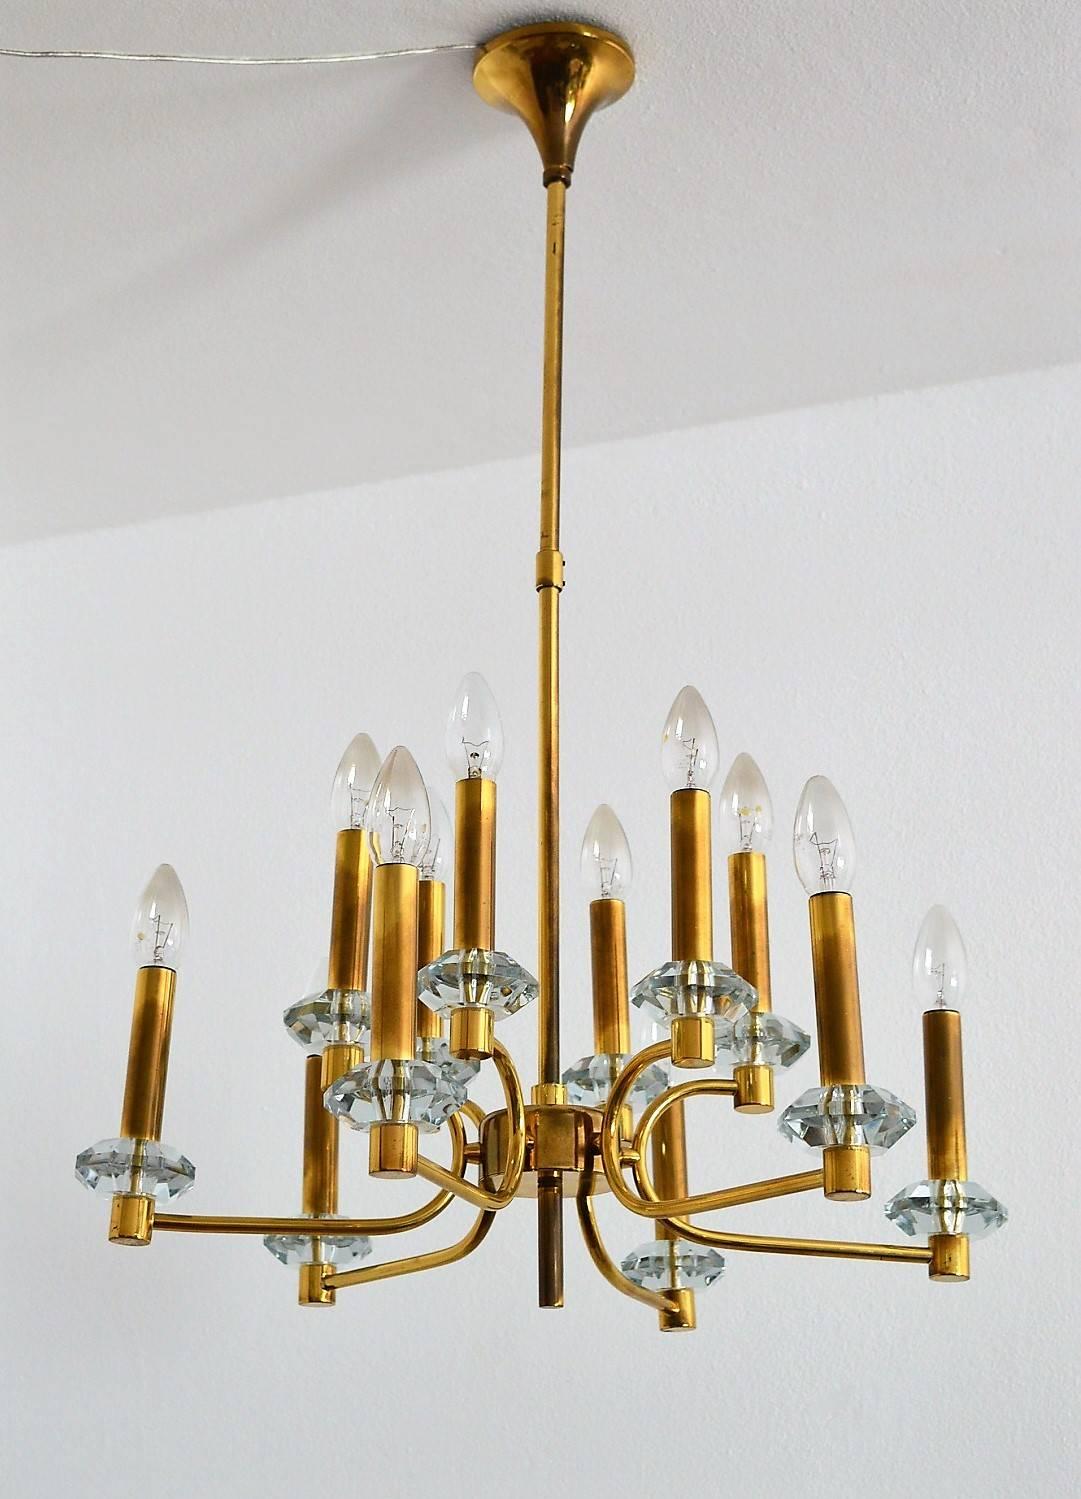 Beautiful and elegant full brass chandelier made in Germany in the 1970s, with six double arms, and on each arm two lights.
The twelve candelabra bulb holders are inserted in long brass pipes, which are positioned on edged glass blocks.
The brass